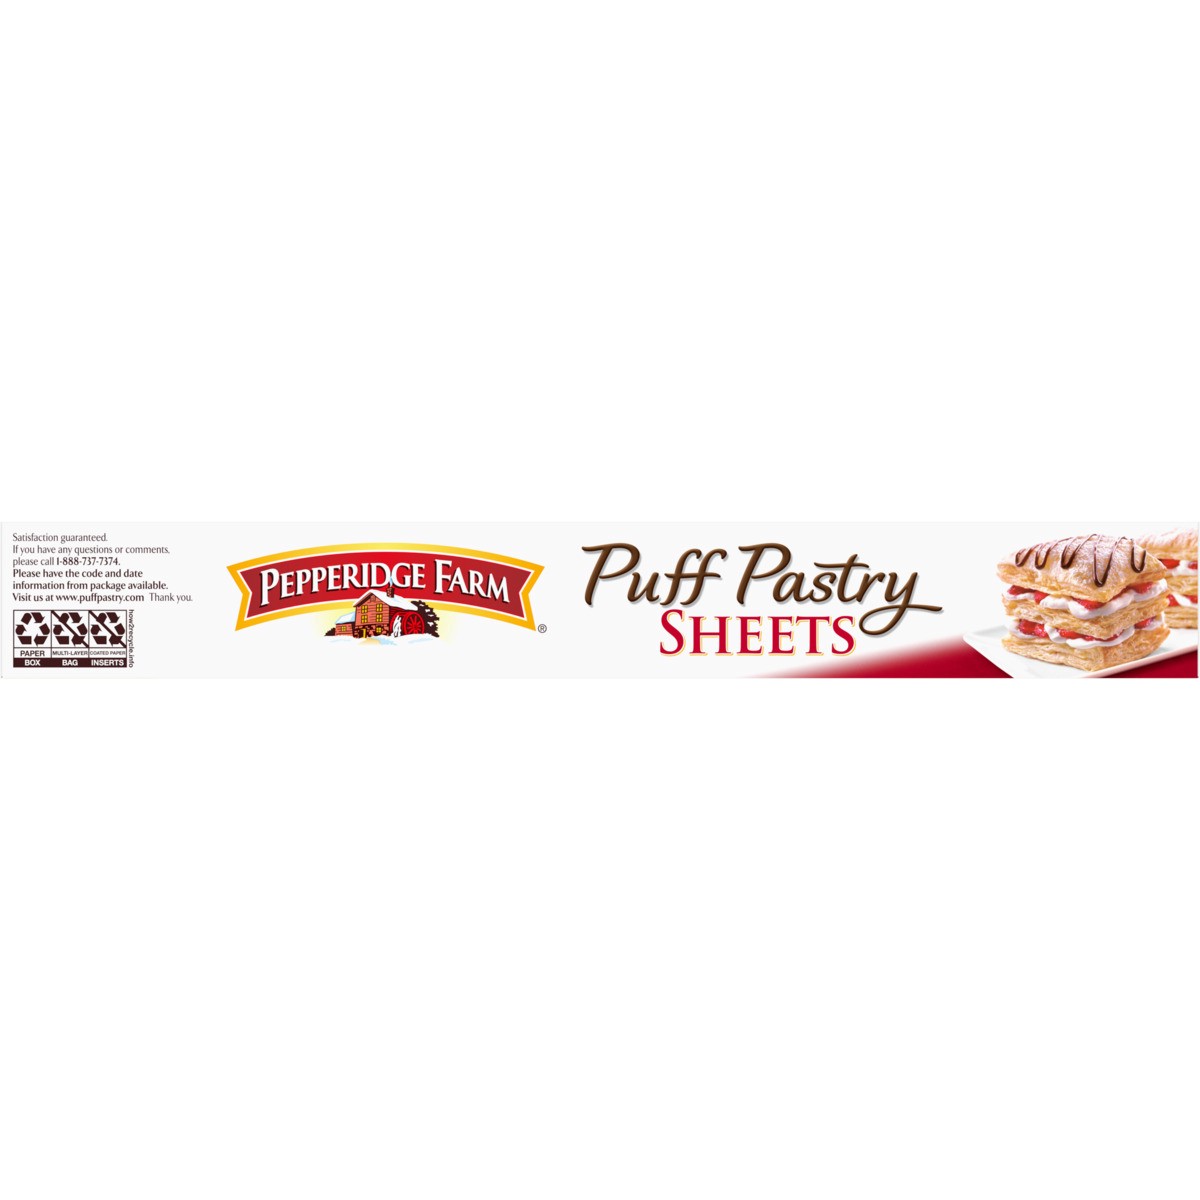 Bowl & Basket Puff Pastry Sheets, 2 count, 17.3 oz